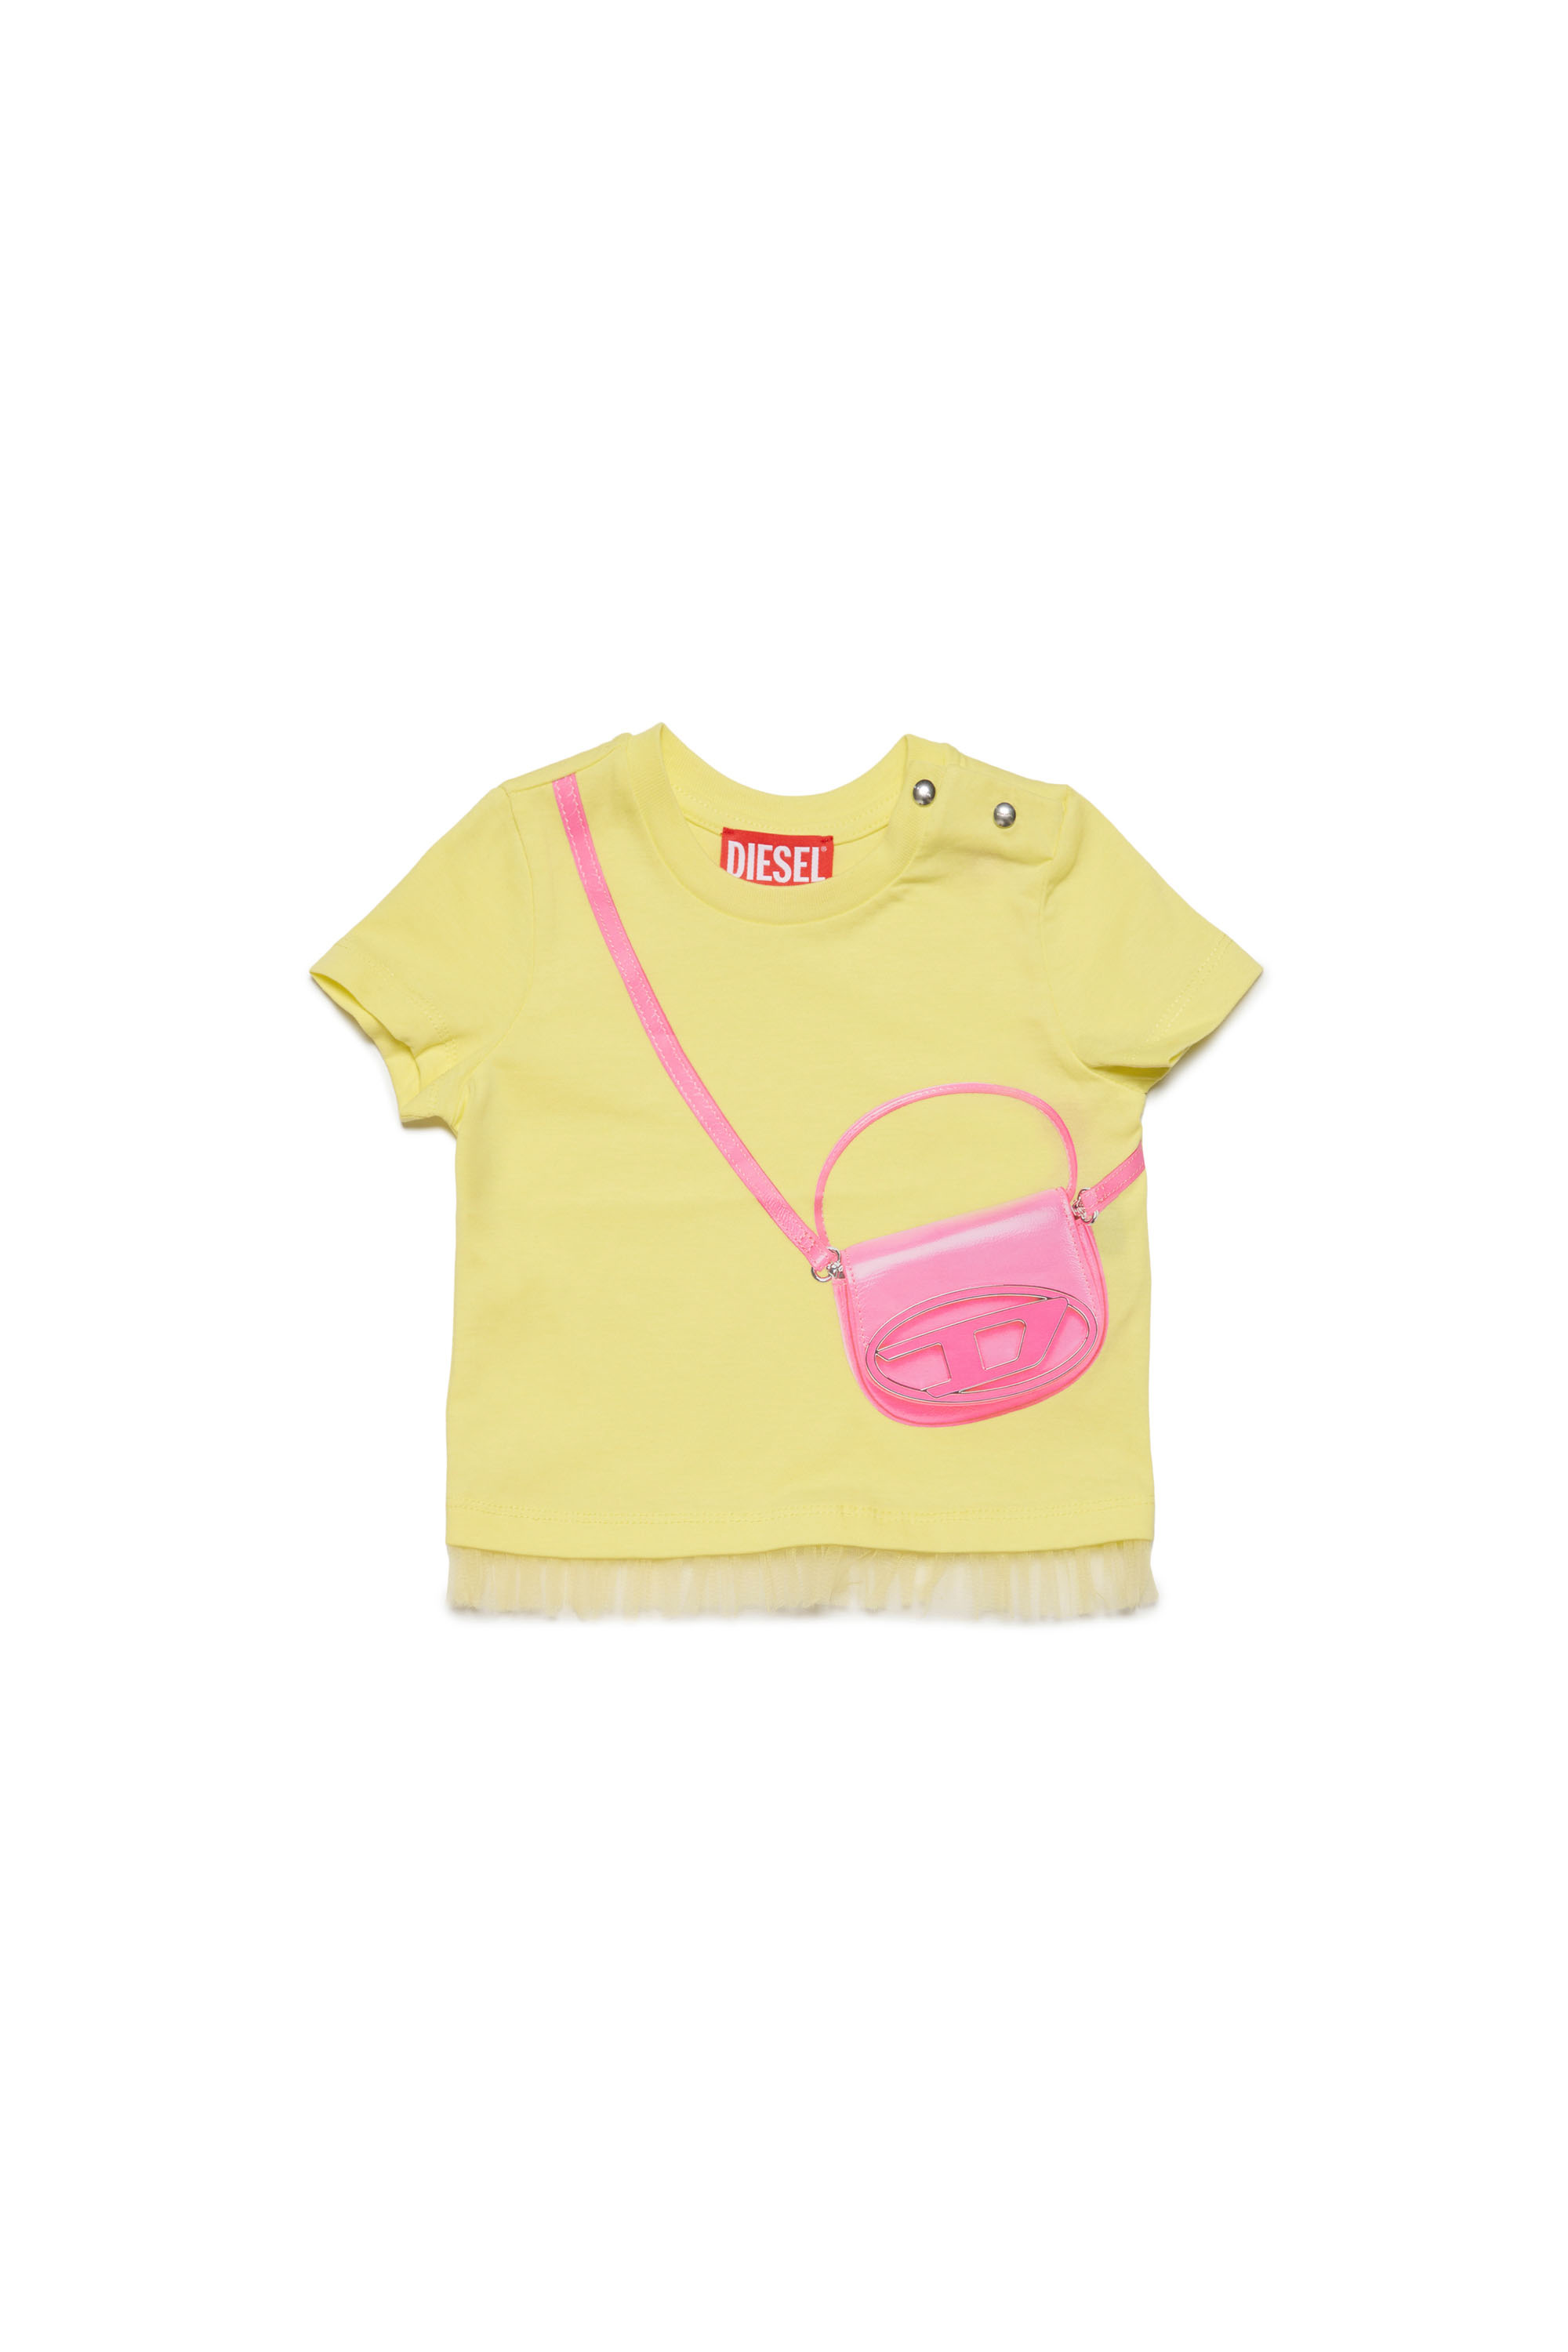 Diesel - T-shirt with trompe l'oeil bag - T-shirts and Tops - Woman - Yellow